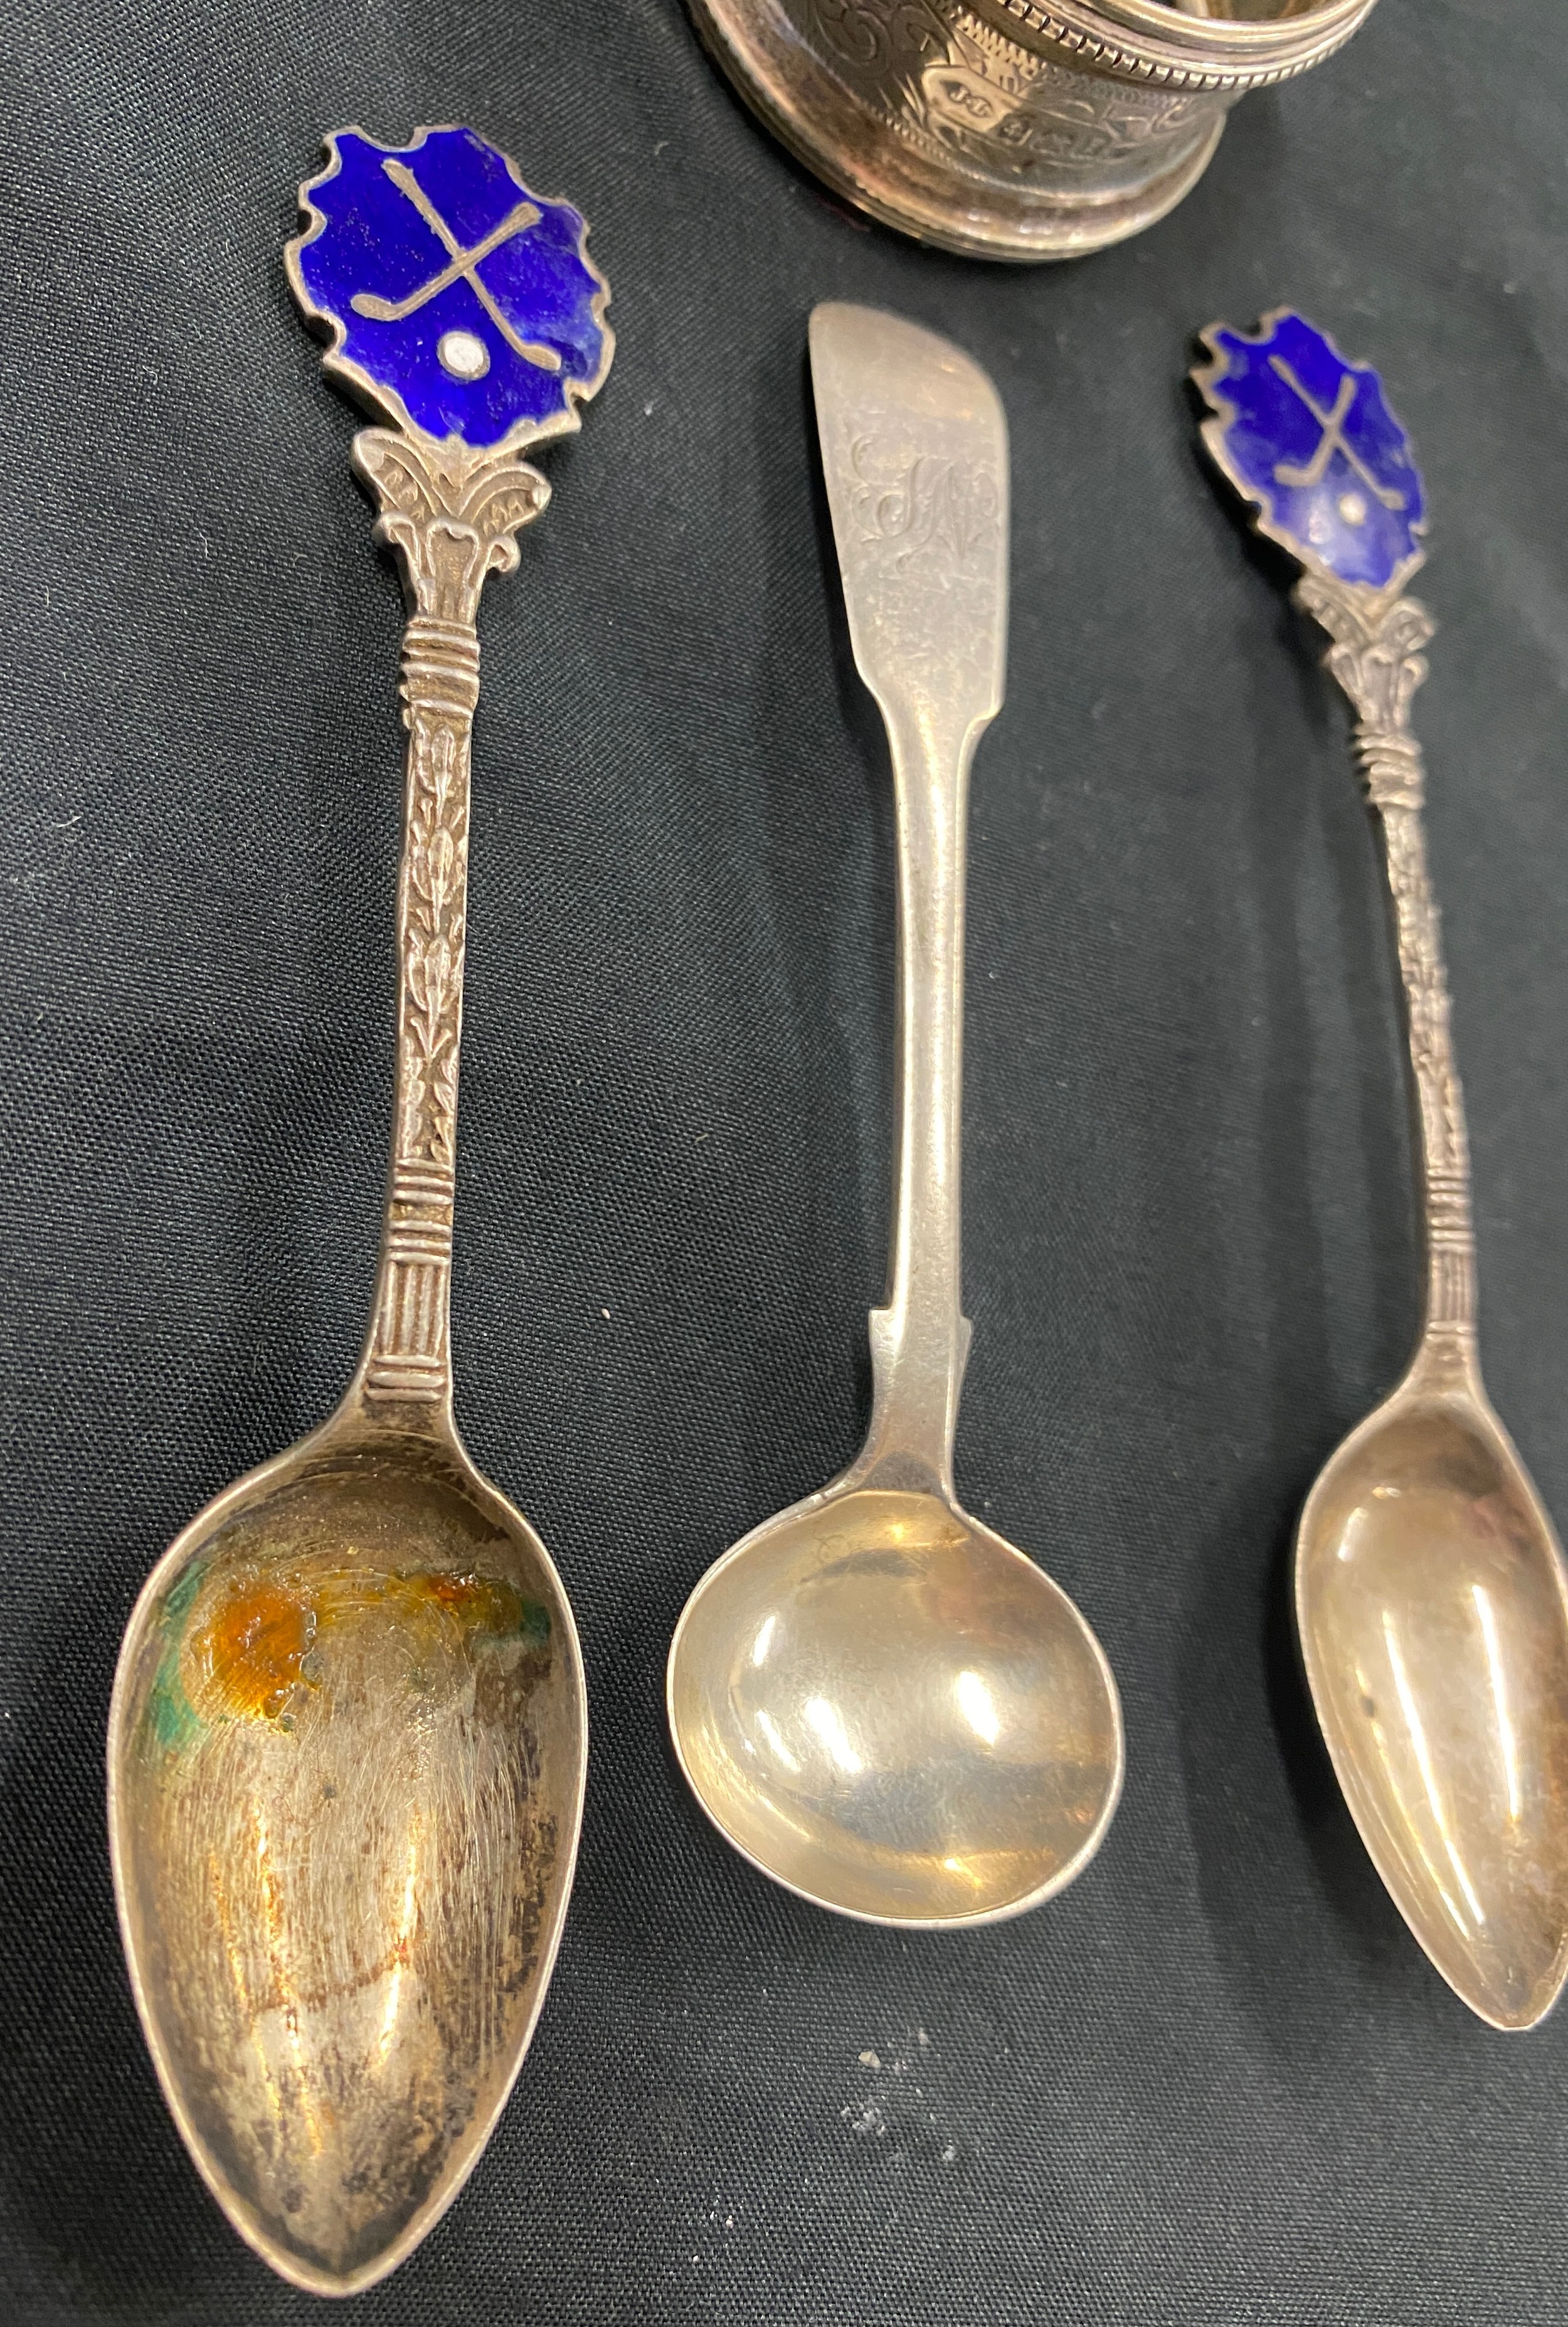 3 silver and enamel spoons and a silver napkin ring - Image 2 of 4